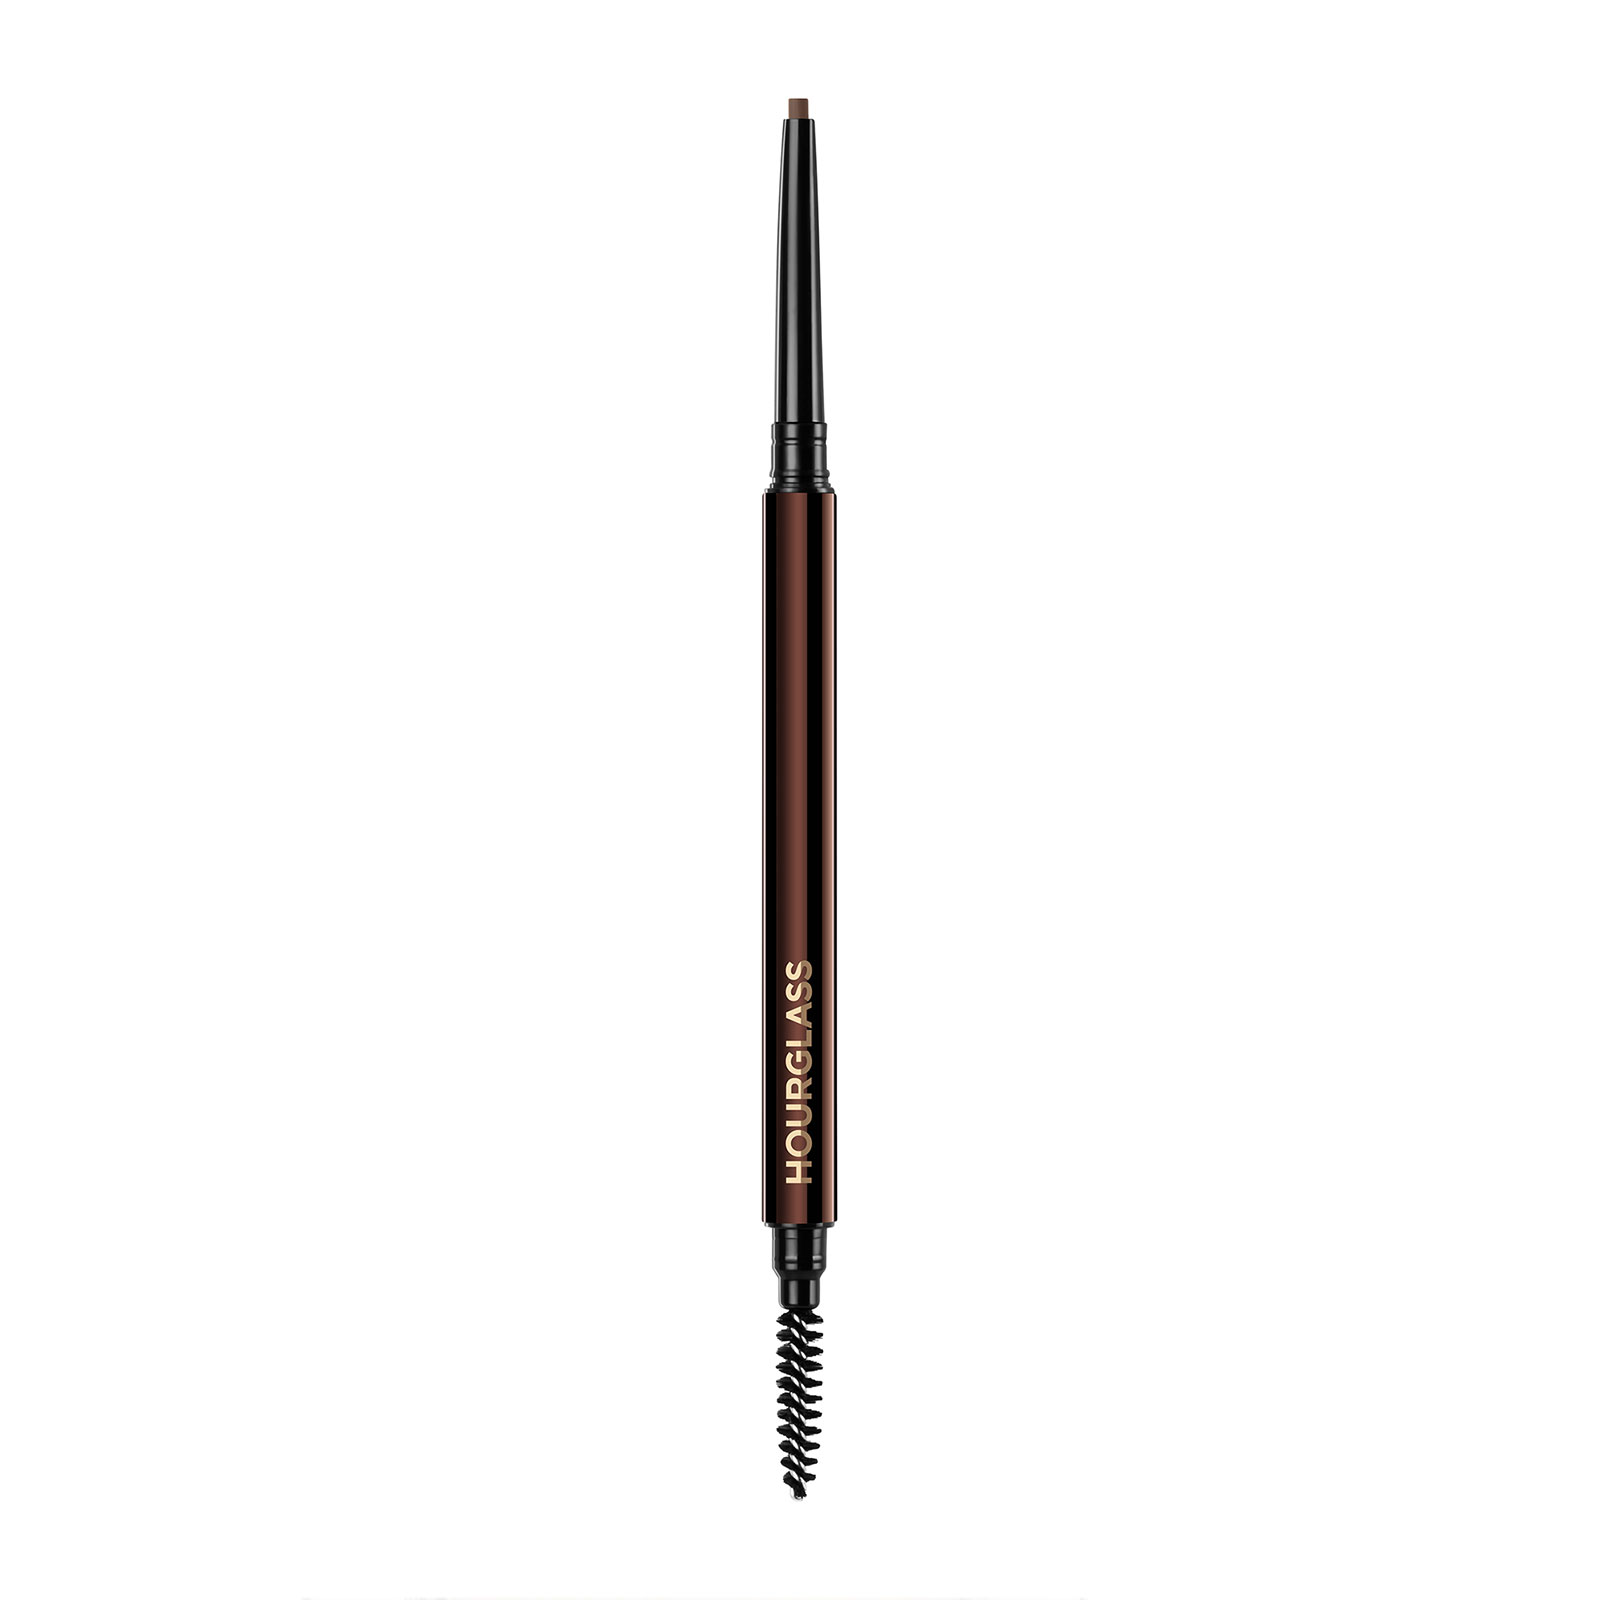 Hourglass Arch Brow Micro Sculpting Pencil 0.4G Soft Brunette